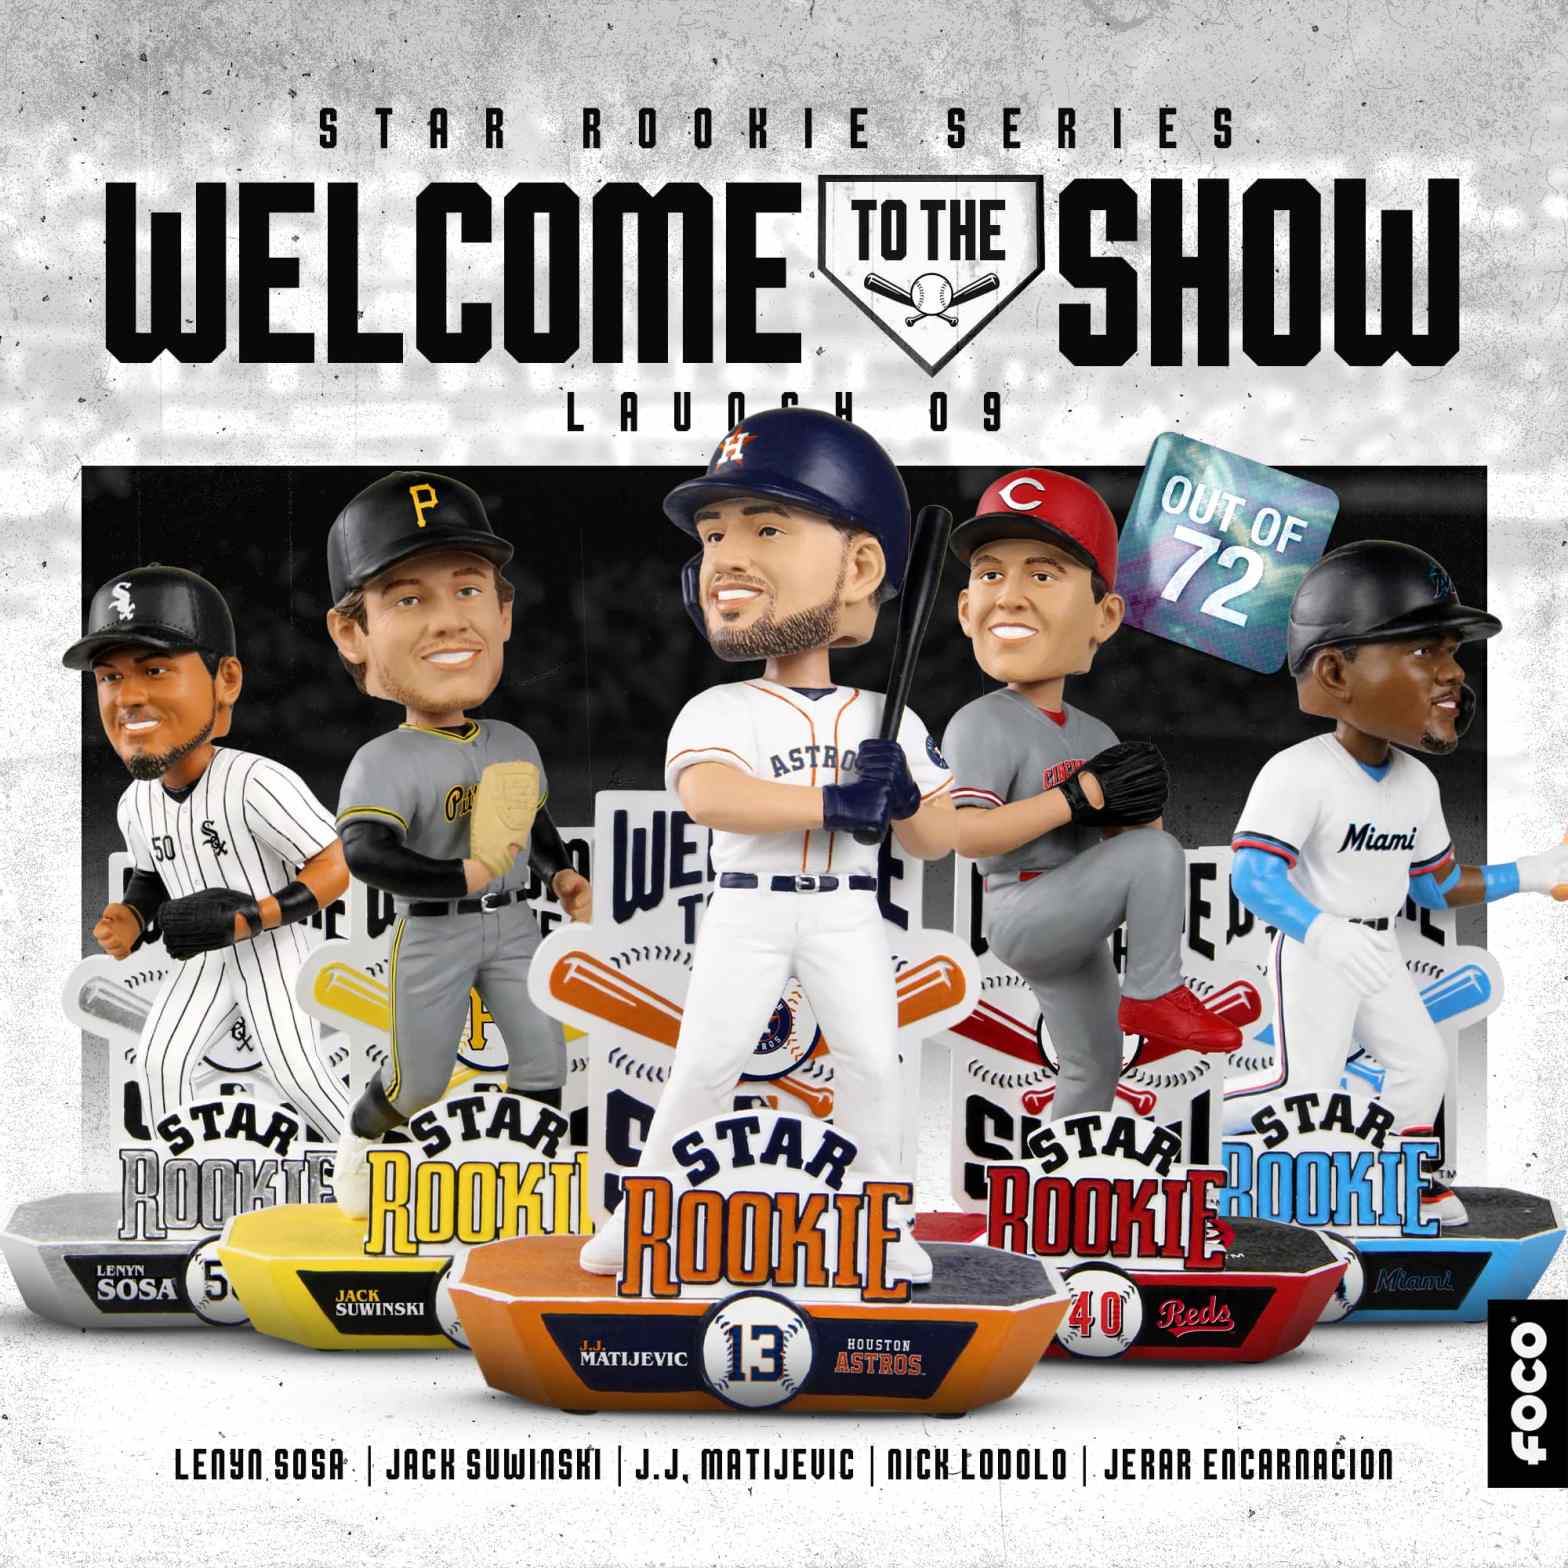 Yoan Moncada Chicago White Sox City Connect Bobblehead Officially Licensed by MLB